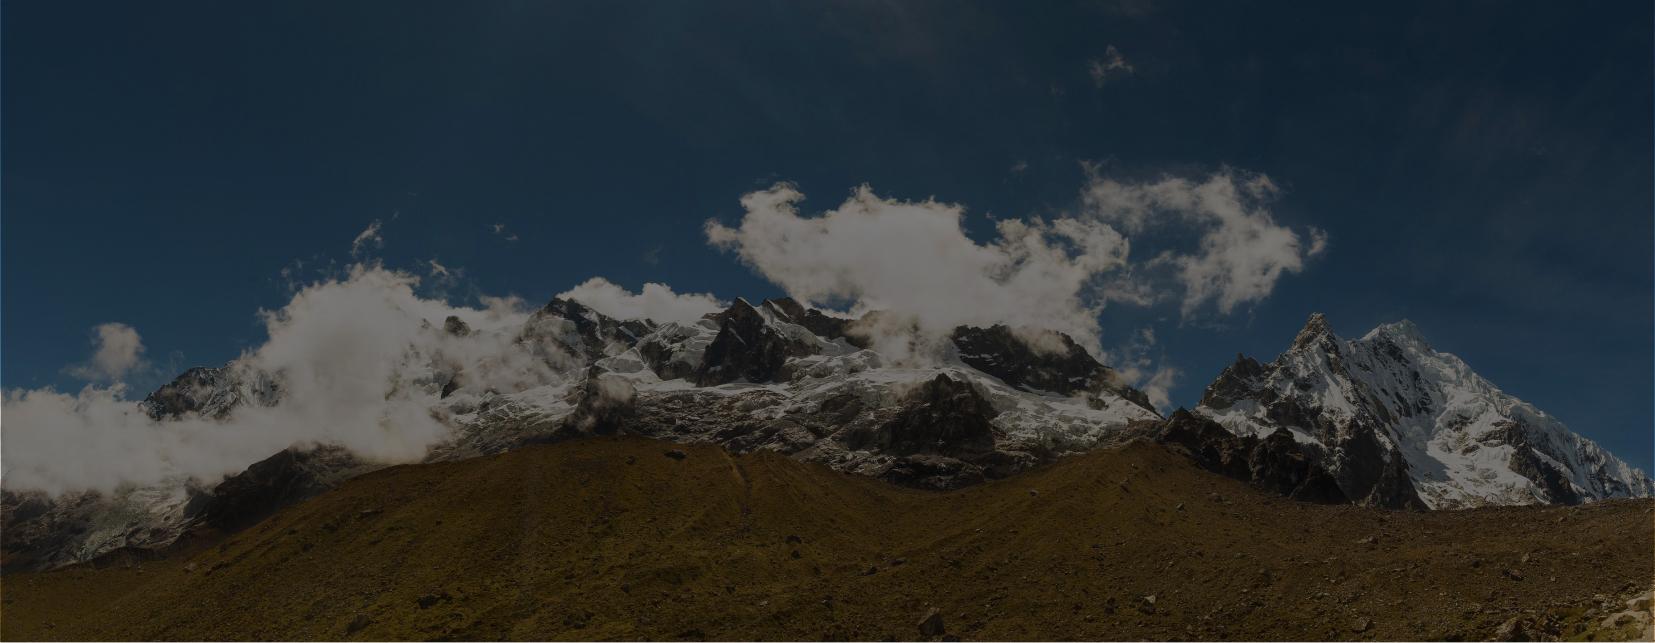 The Highest Mountain in Peru & Her Other Gigantic Peaks image